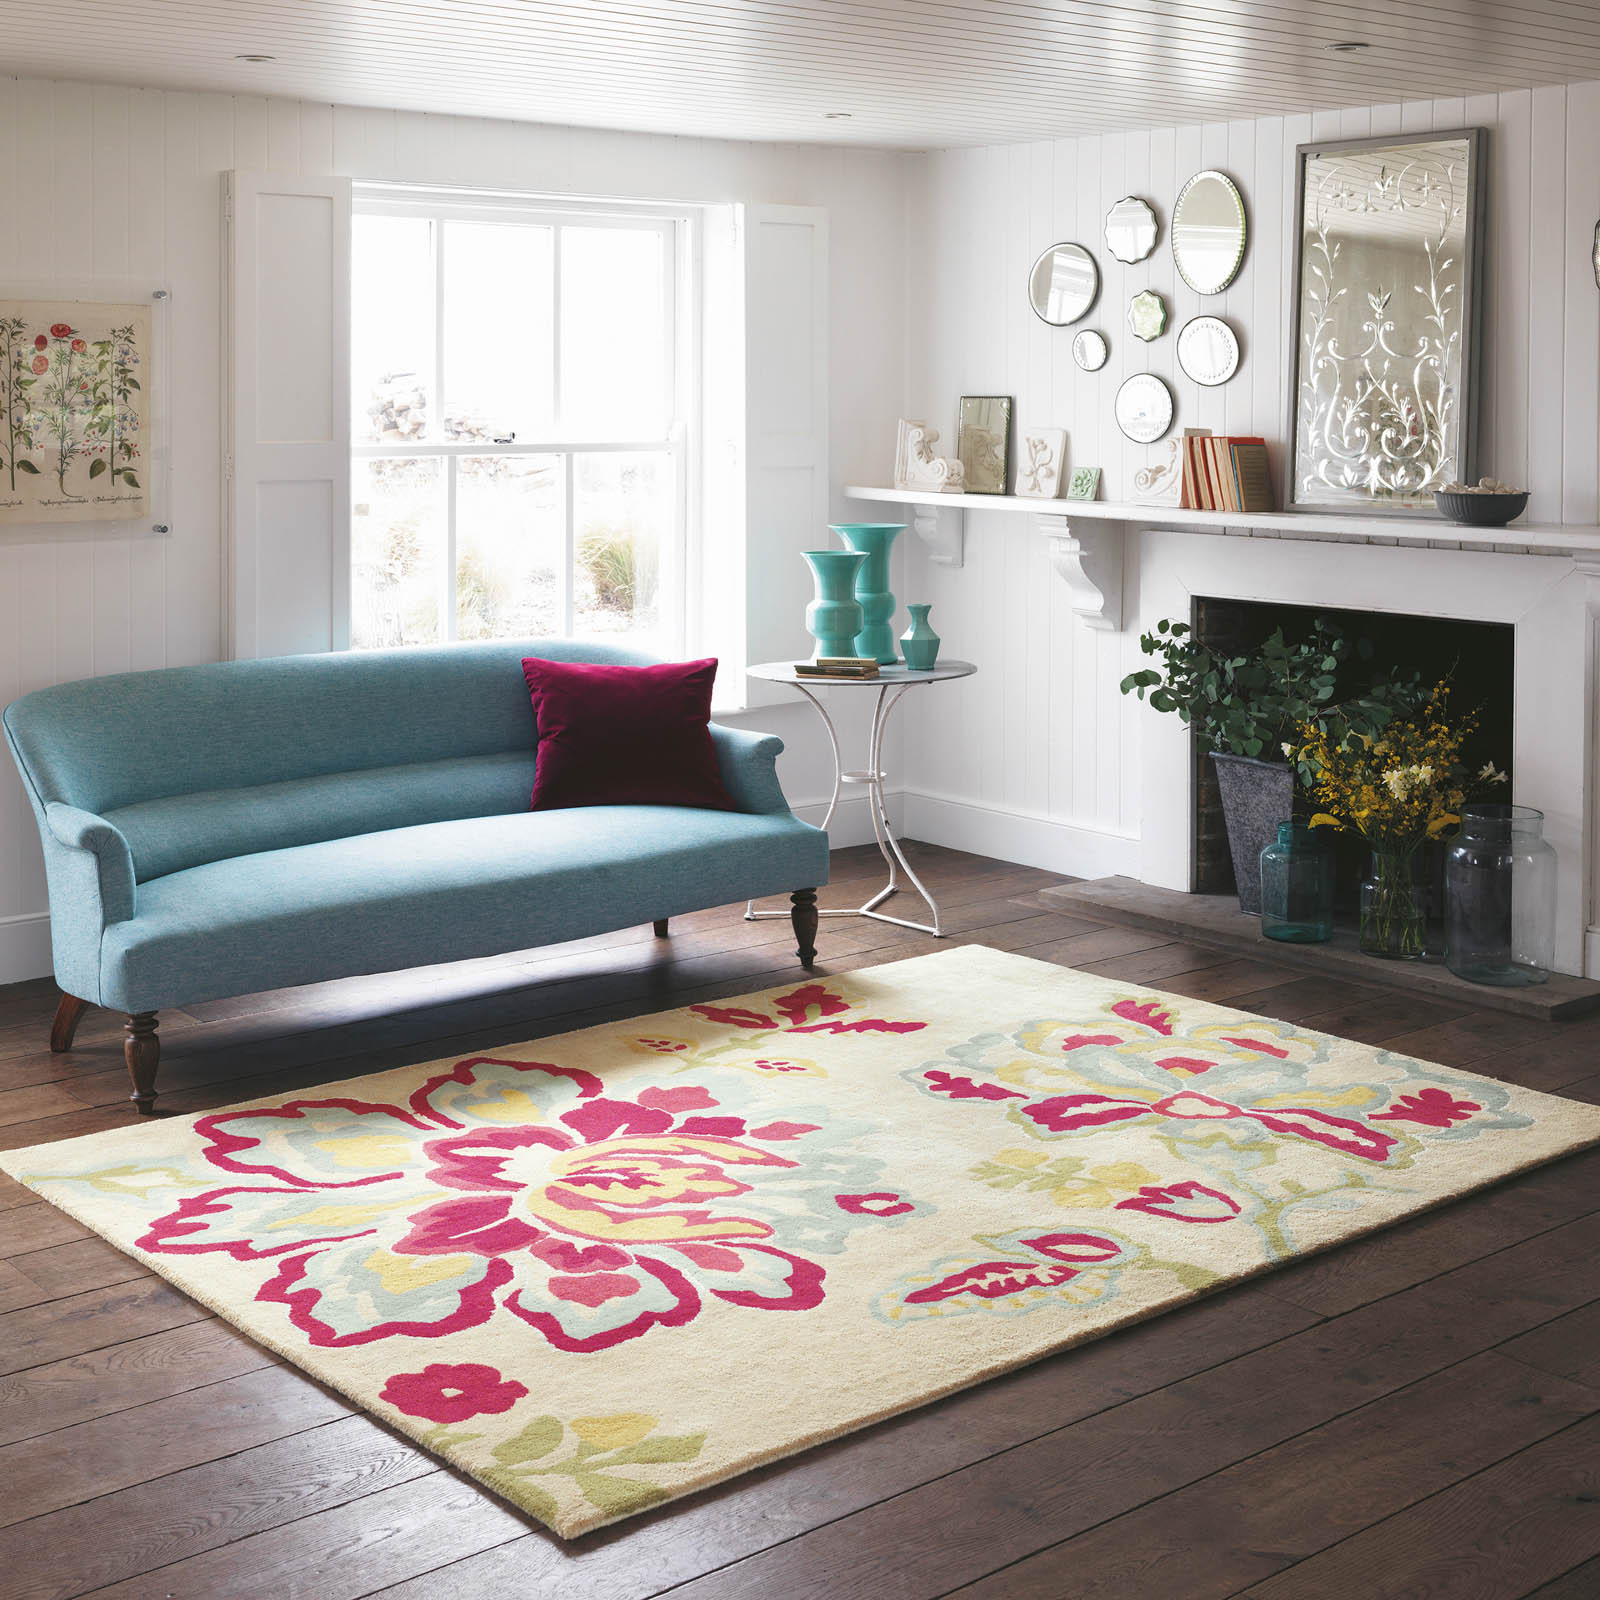 Mother's Day gift, Sanderson Angelique Rugs 46500 in Rose